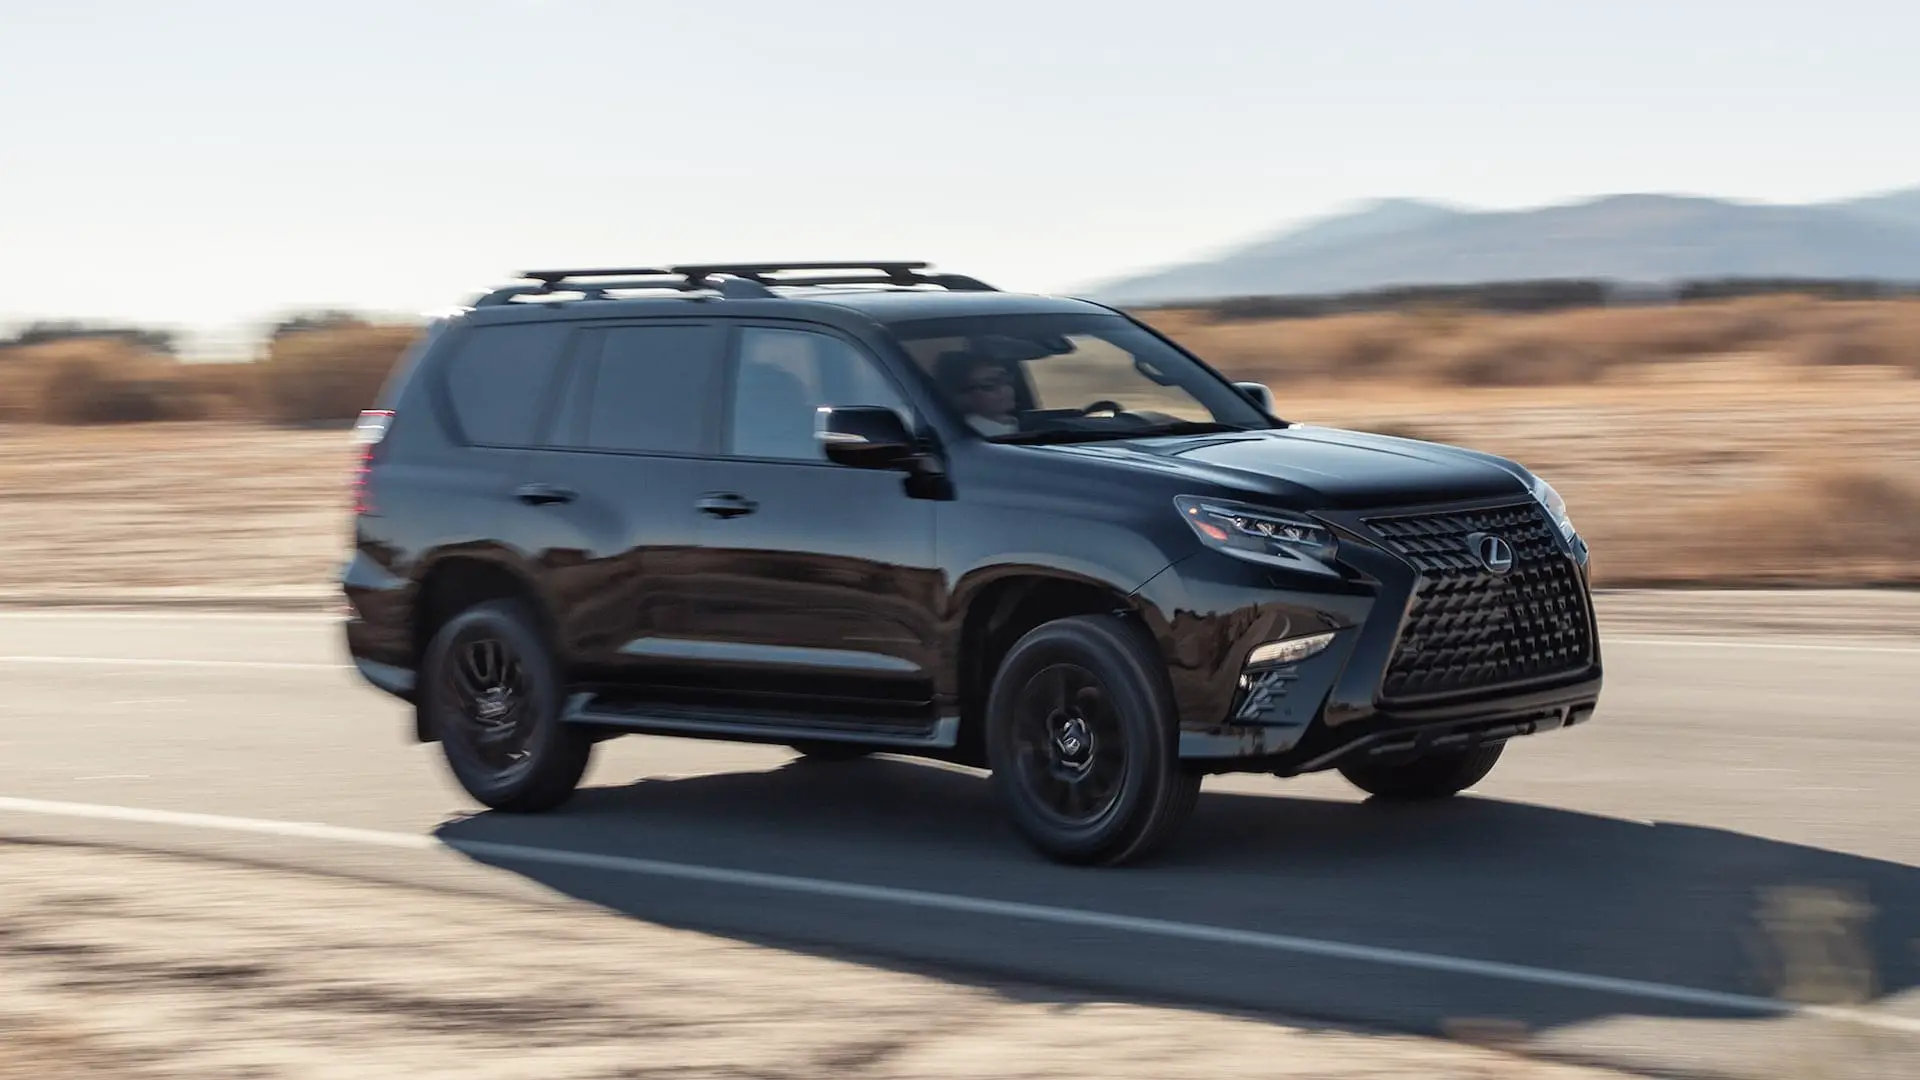 Is The Lexus GX460 Good For Towing Boats?